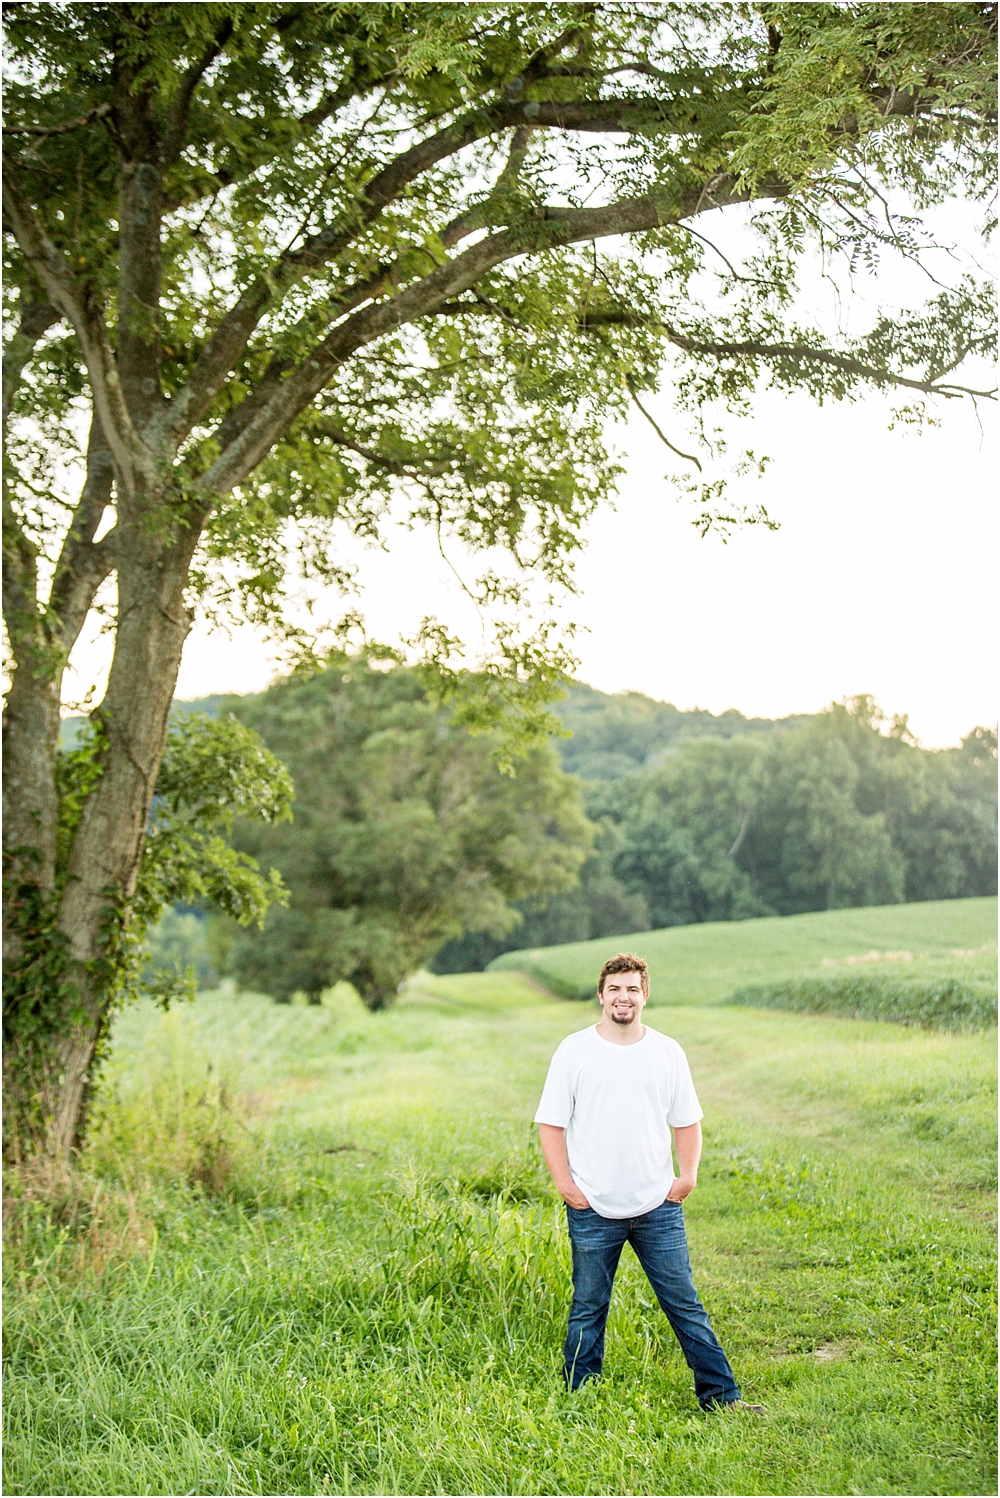 Sydney James Engagement Session with Horses Living Radiant Photography photos_0031.jpg